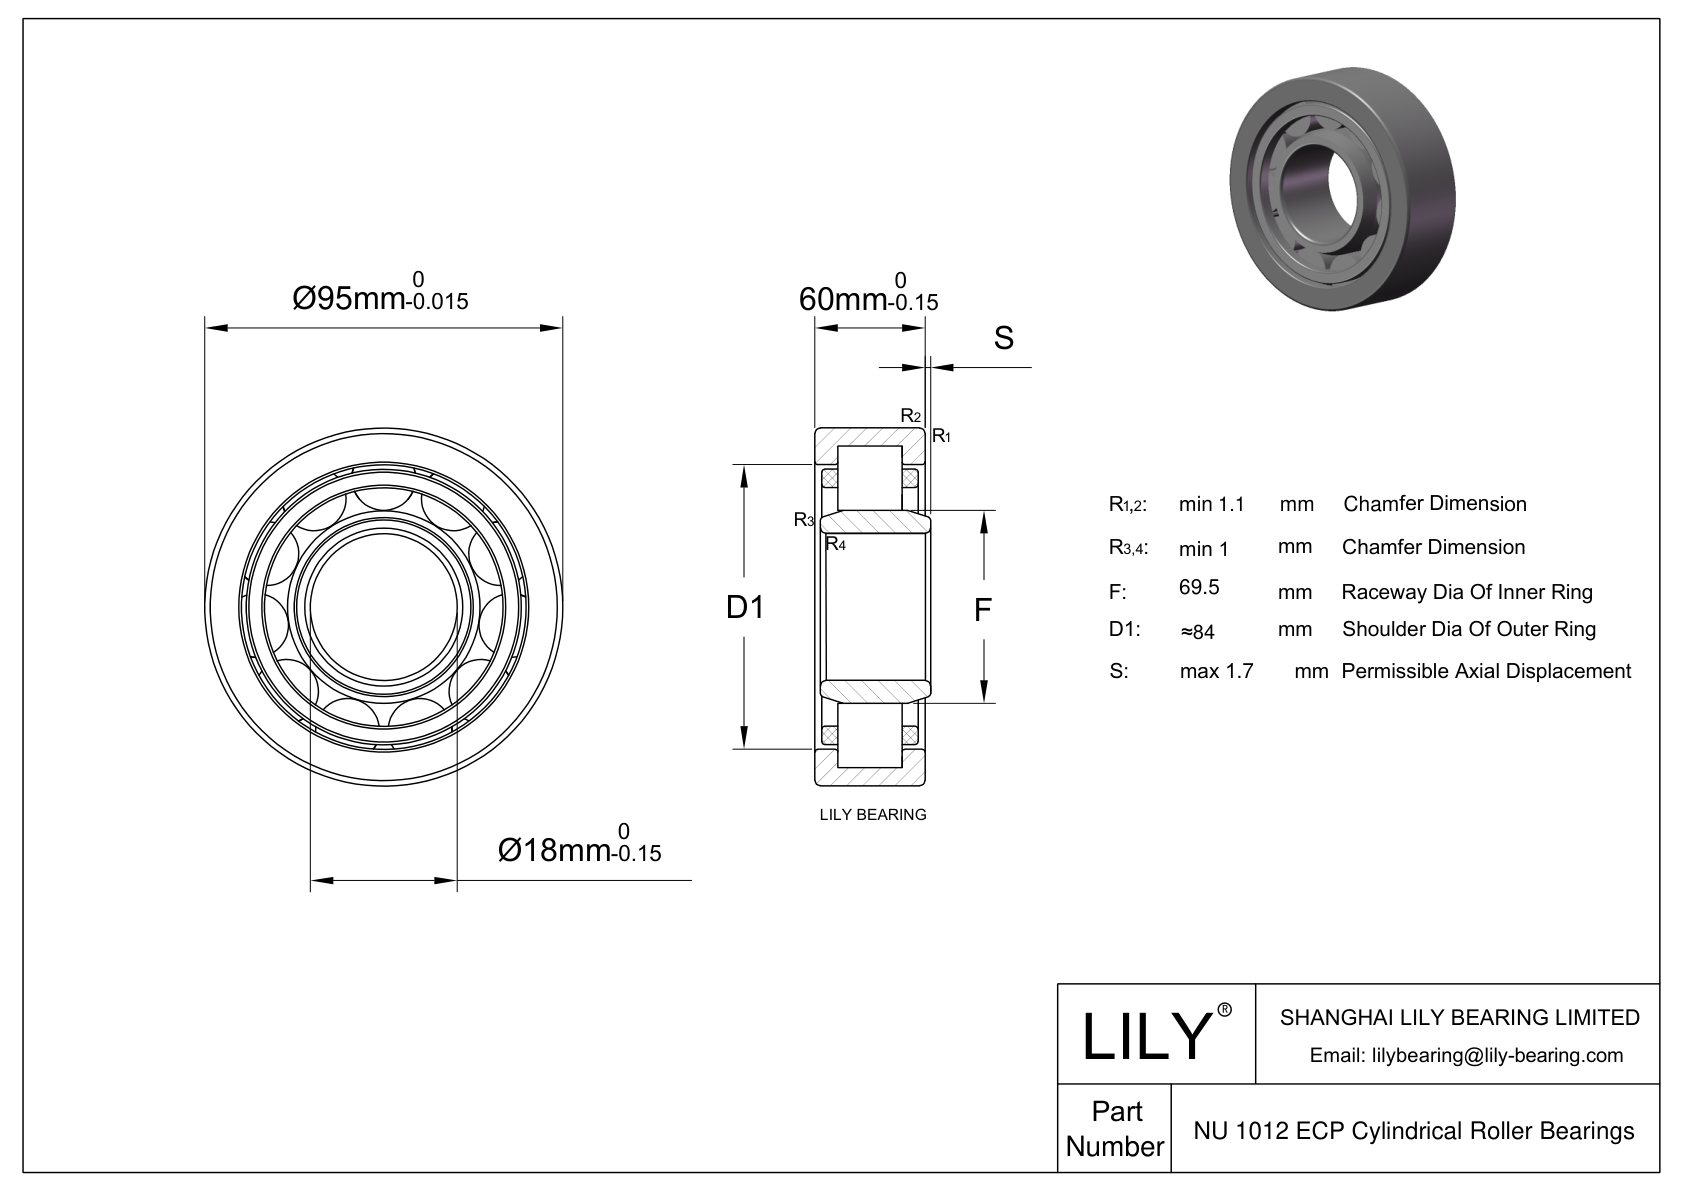 NU 1012 ECP/C3VL0241 Ceramic Coated Cylindrical Roller Bearings cad drawing